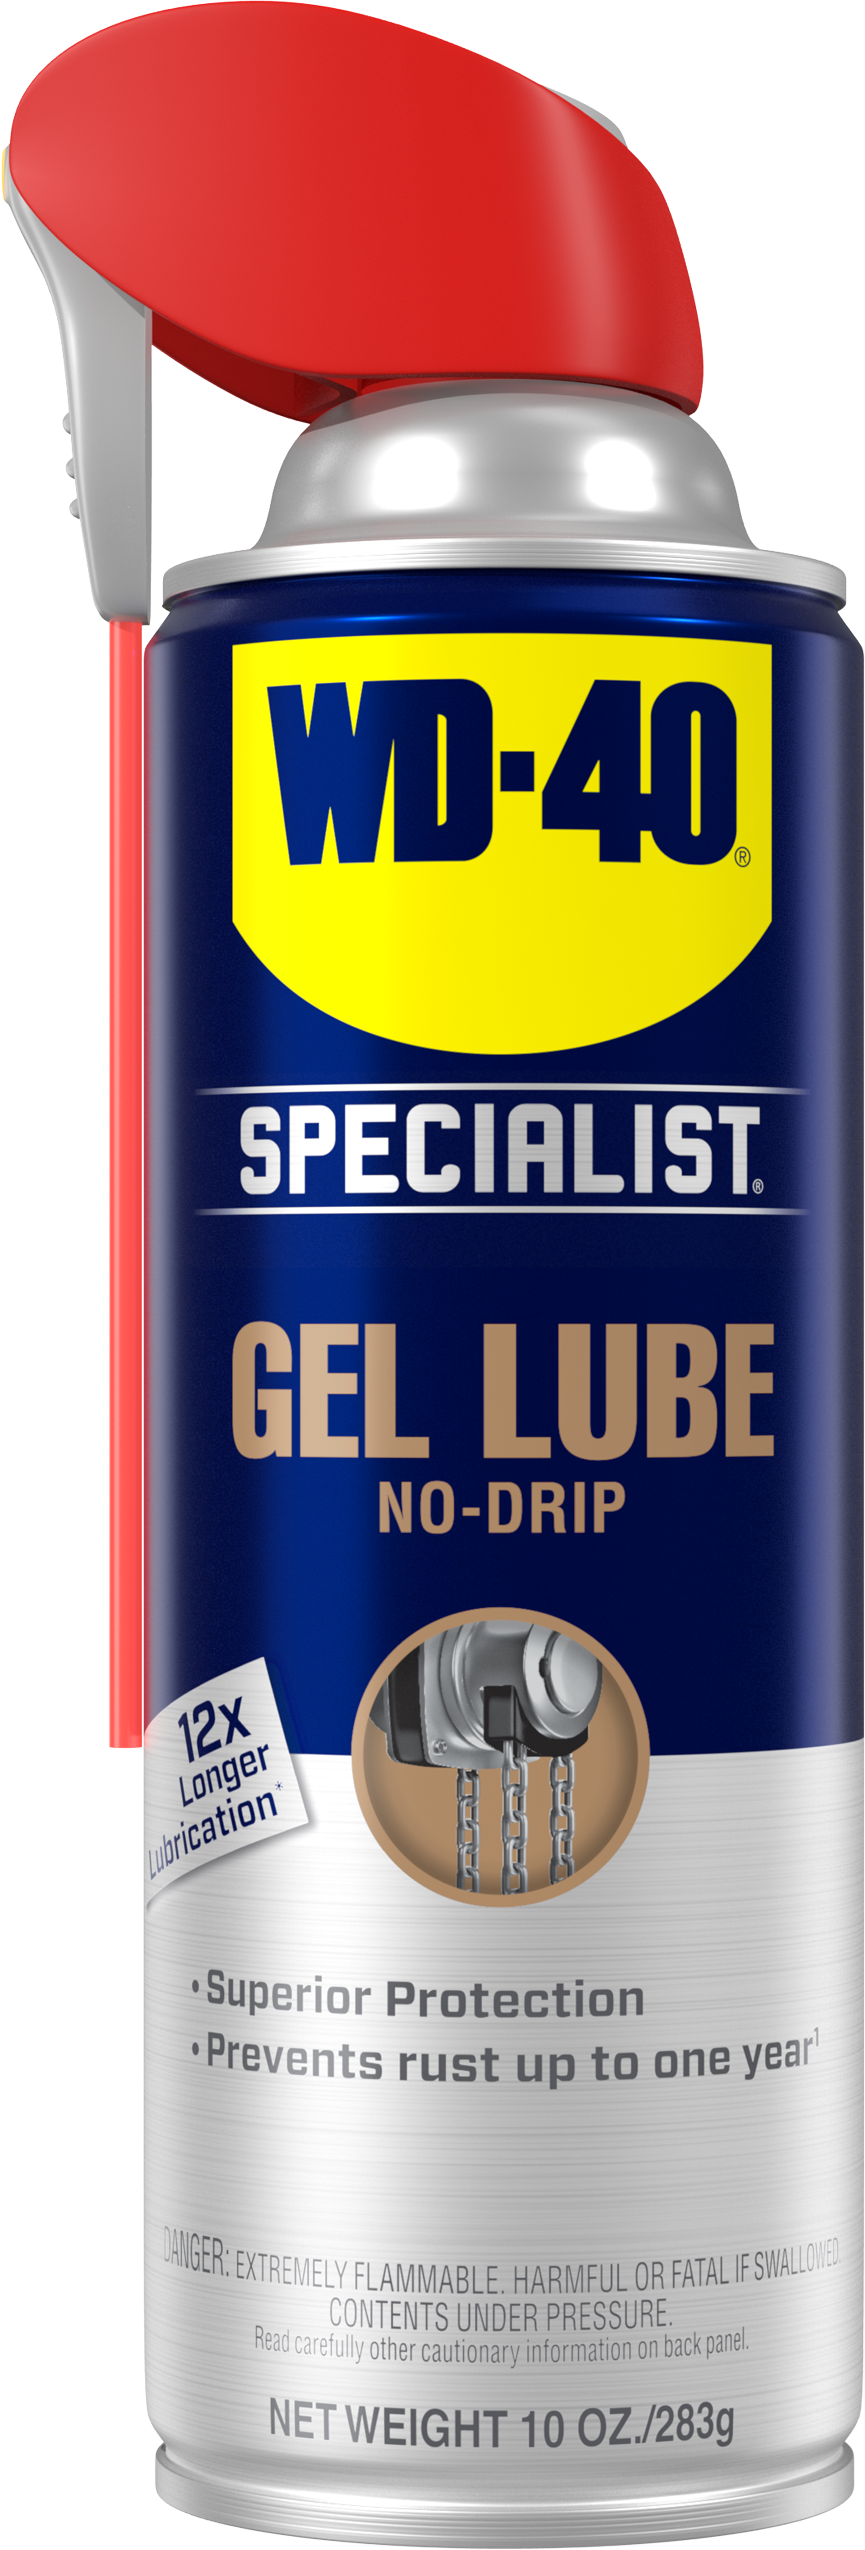 Wd 40 Specialist Products Lubricant Degreasers Cleaners Wd 40